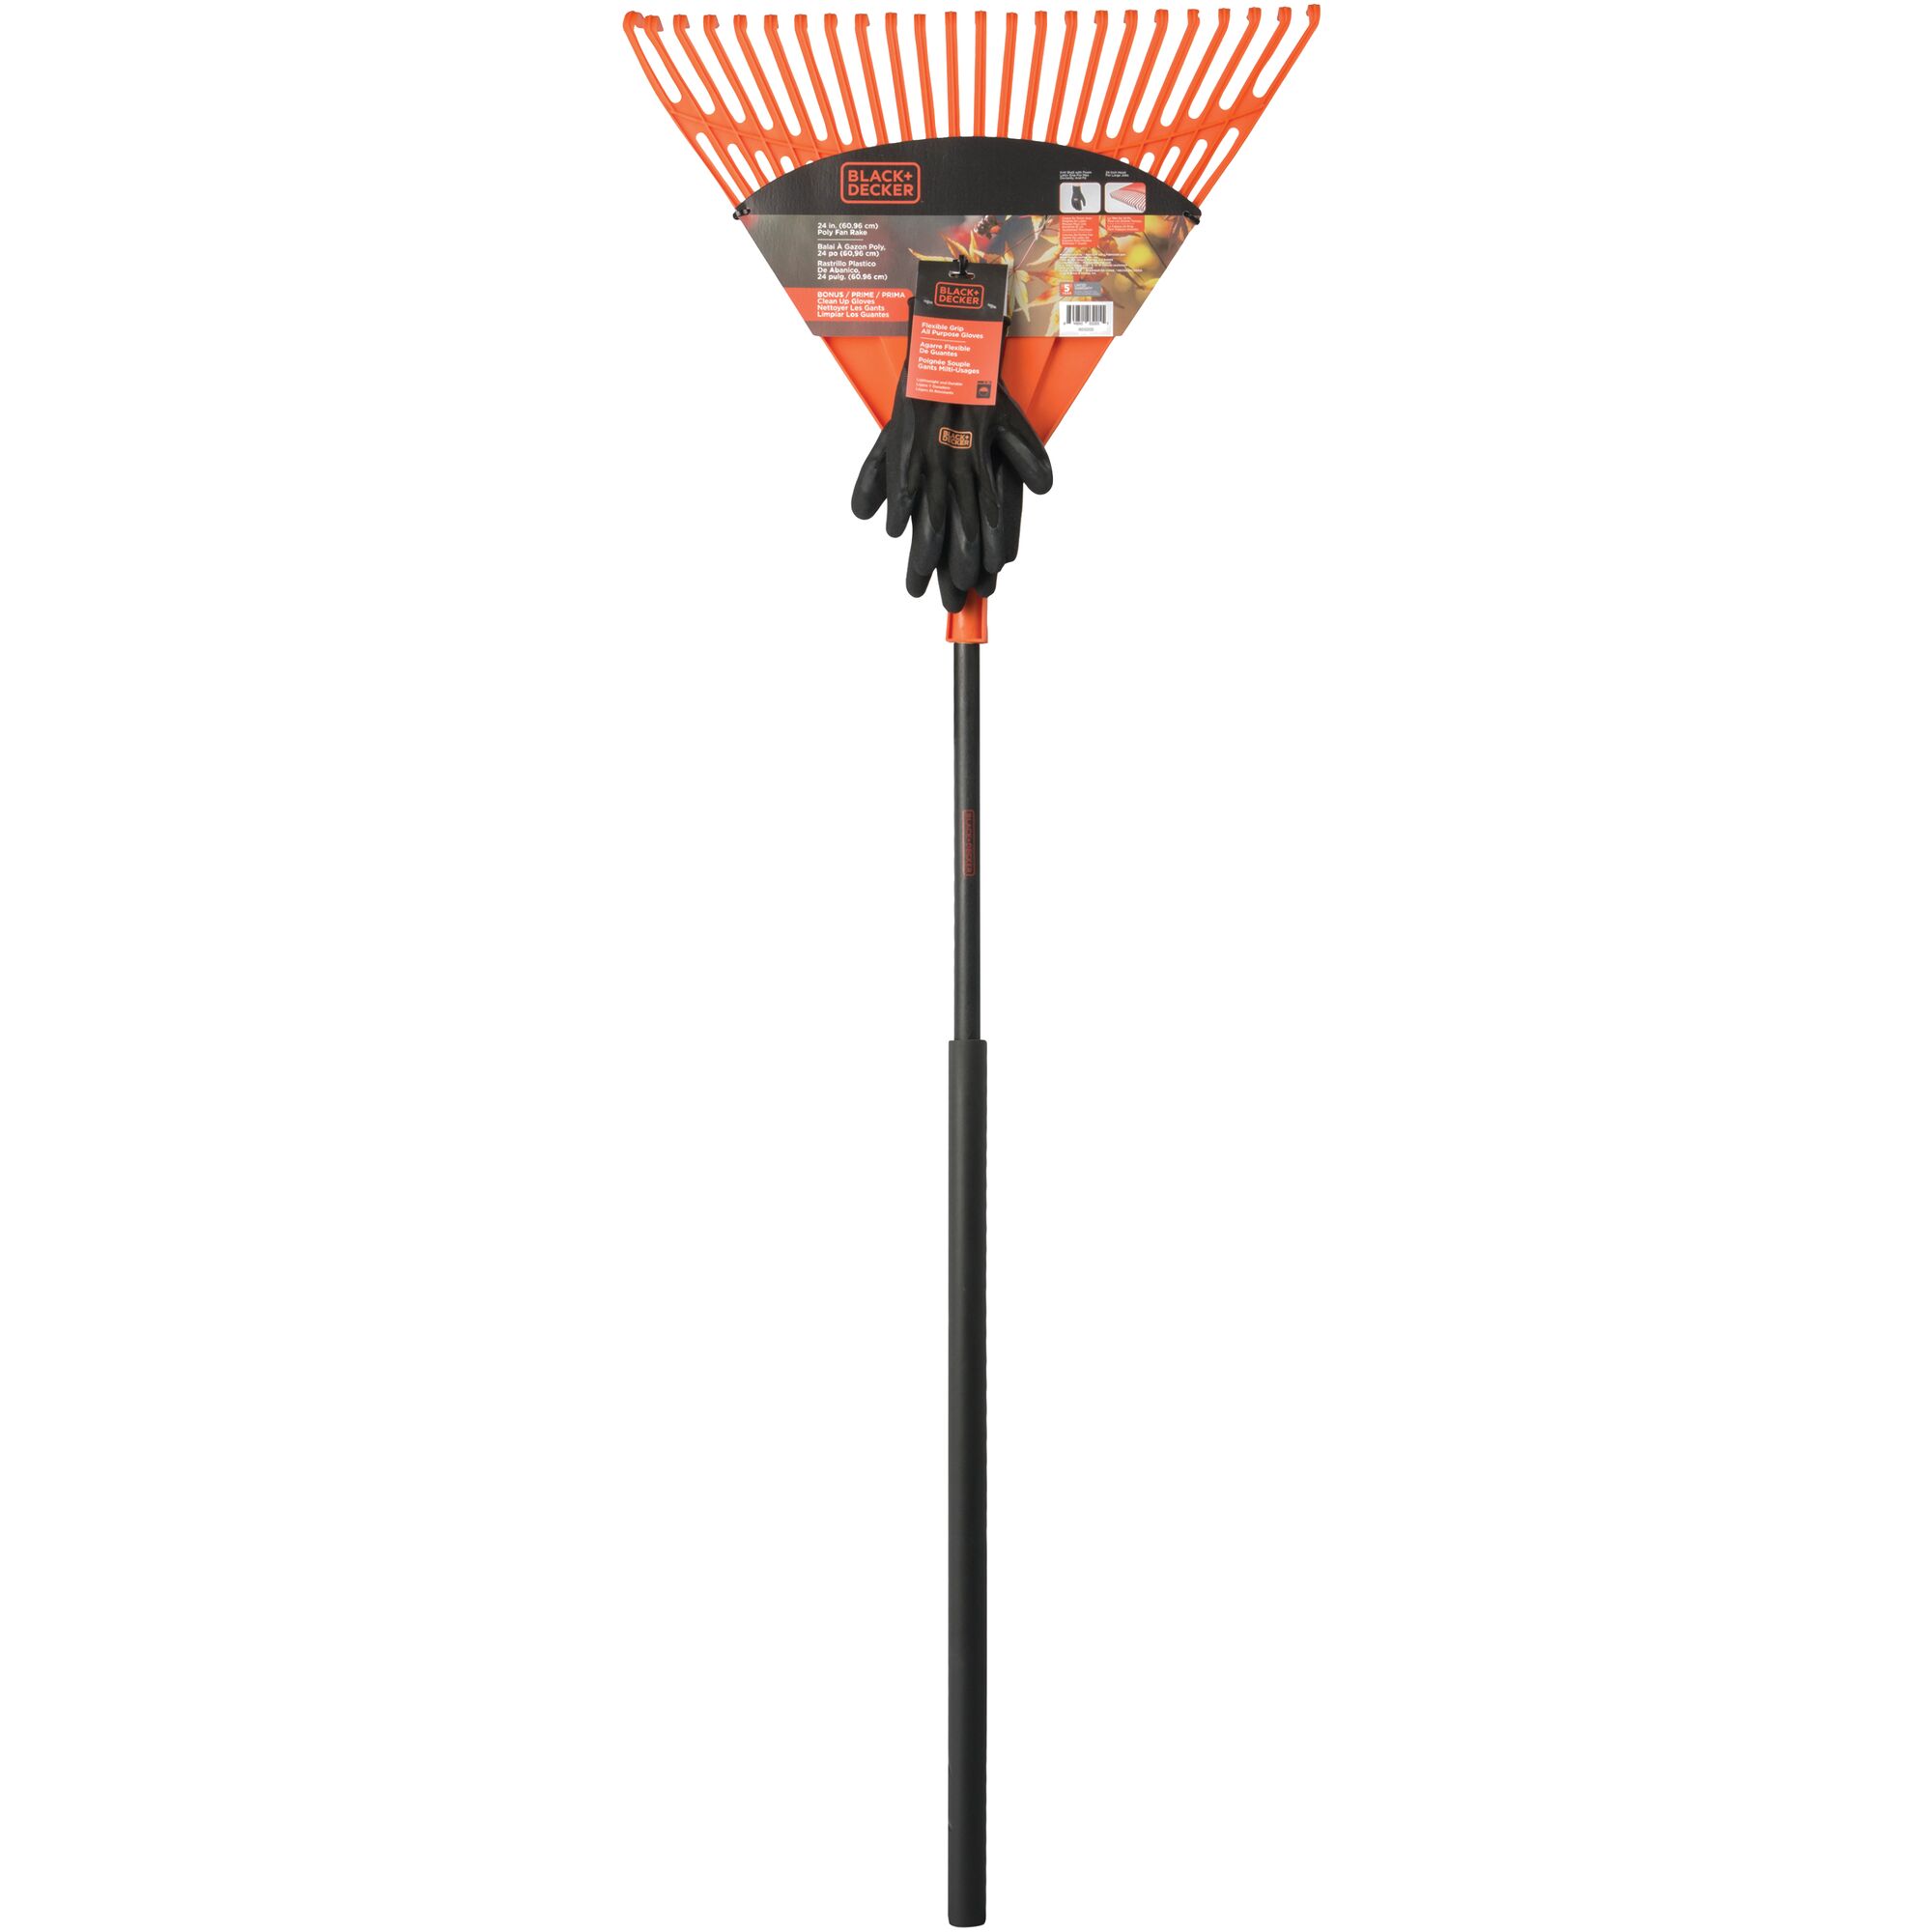 24 inch poly rake with glove combo pack.